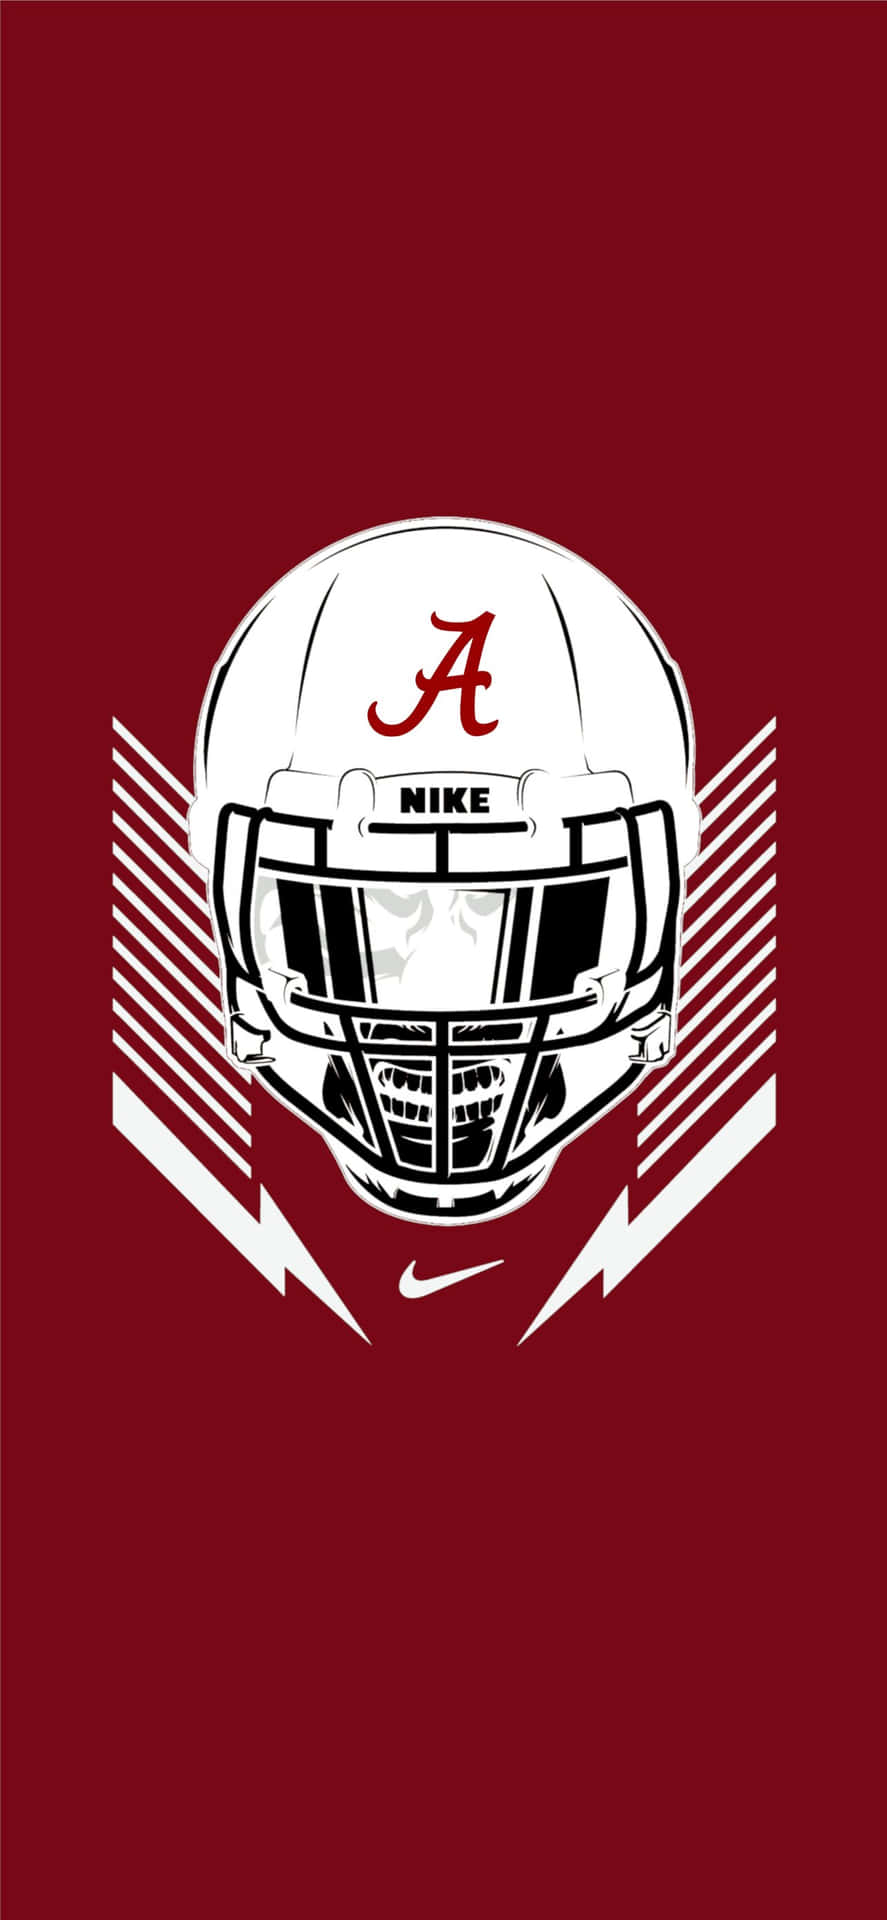 Represent your favorite college football team, Alabama Crimson Tide, on your iPhone Wallpaper